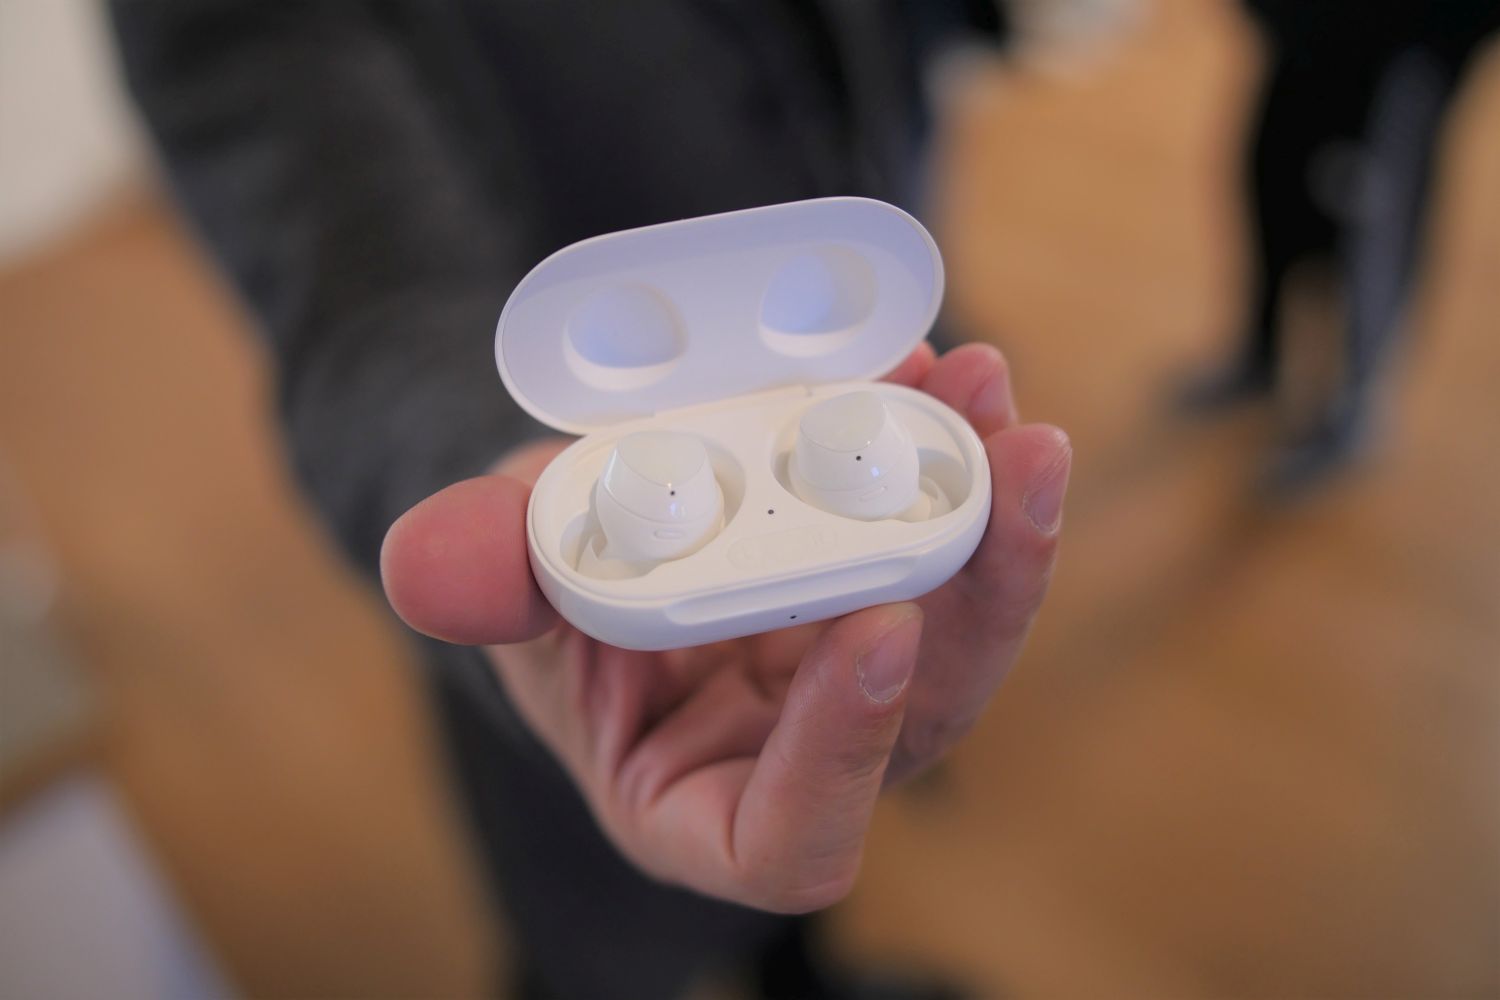 Ideal Samsung Galaxy Buds promotions for June 2022